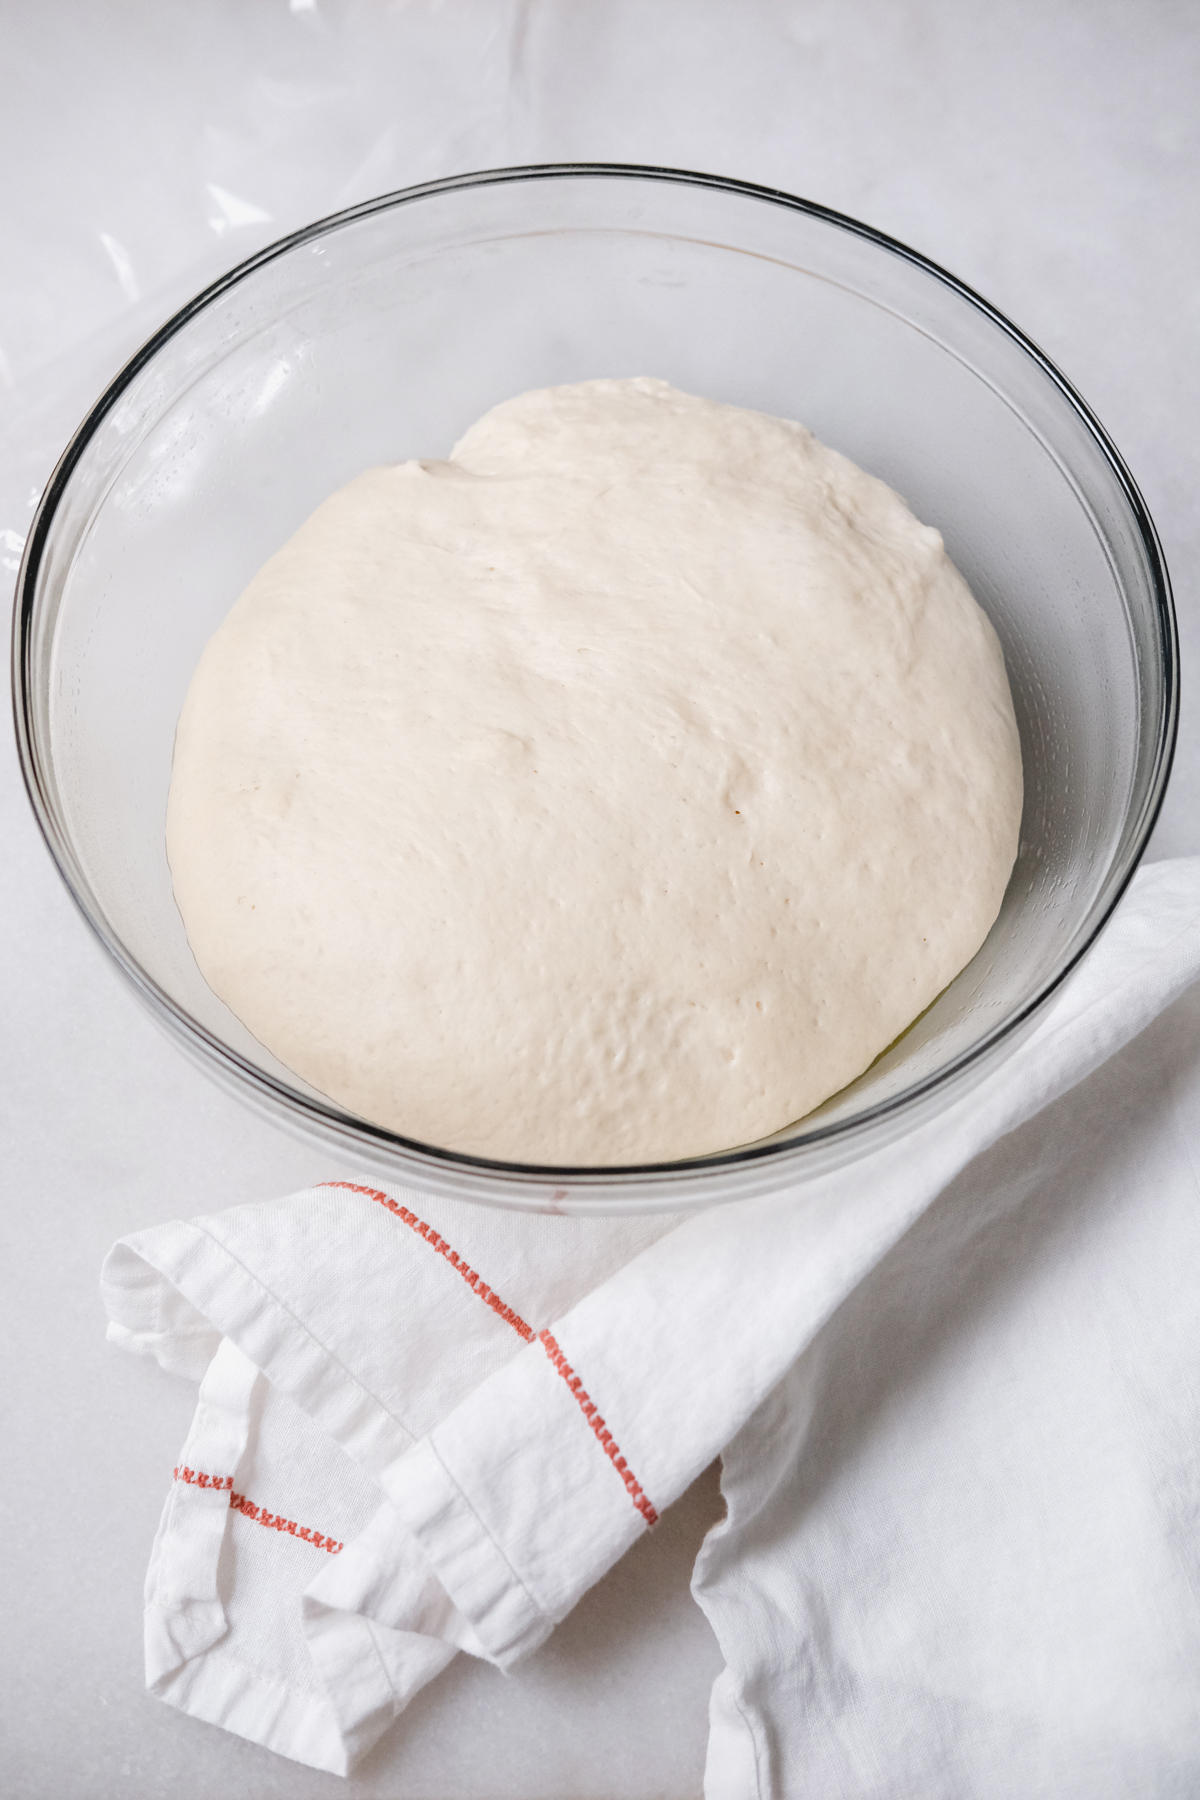 easy homemade pizza dough after the first rise in a bowl